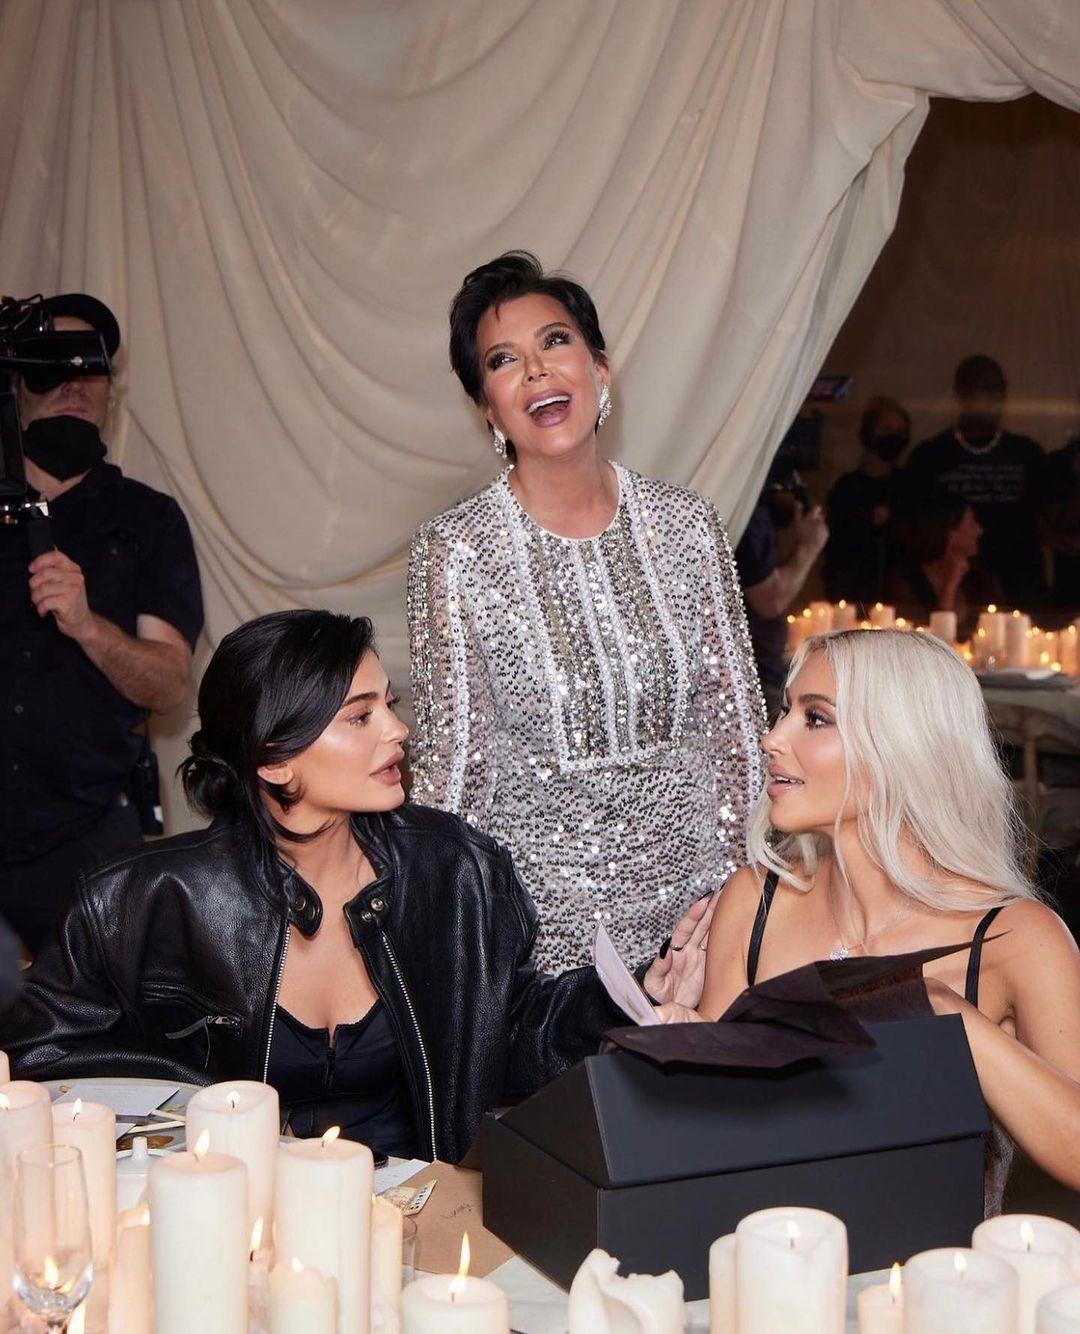 Kris Jenner's post on her Instagram page